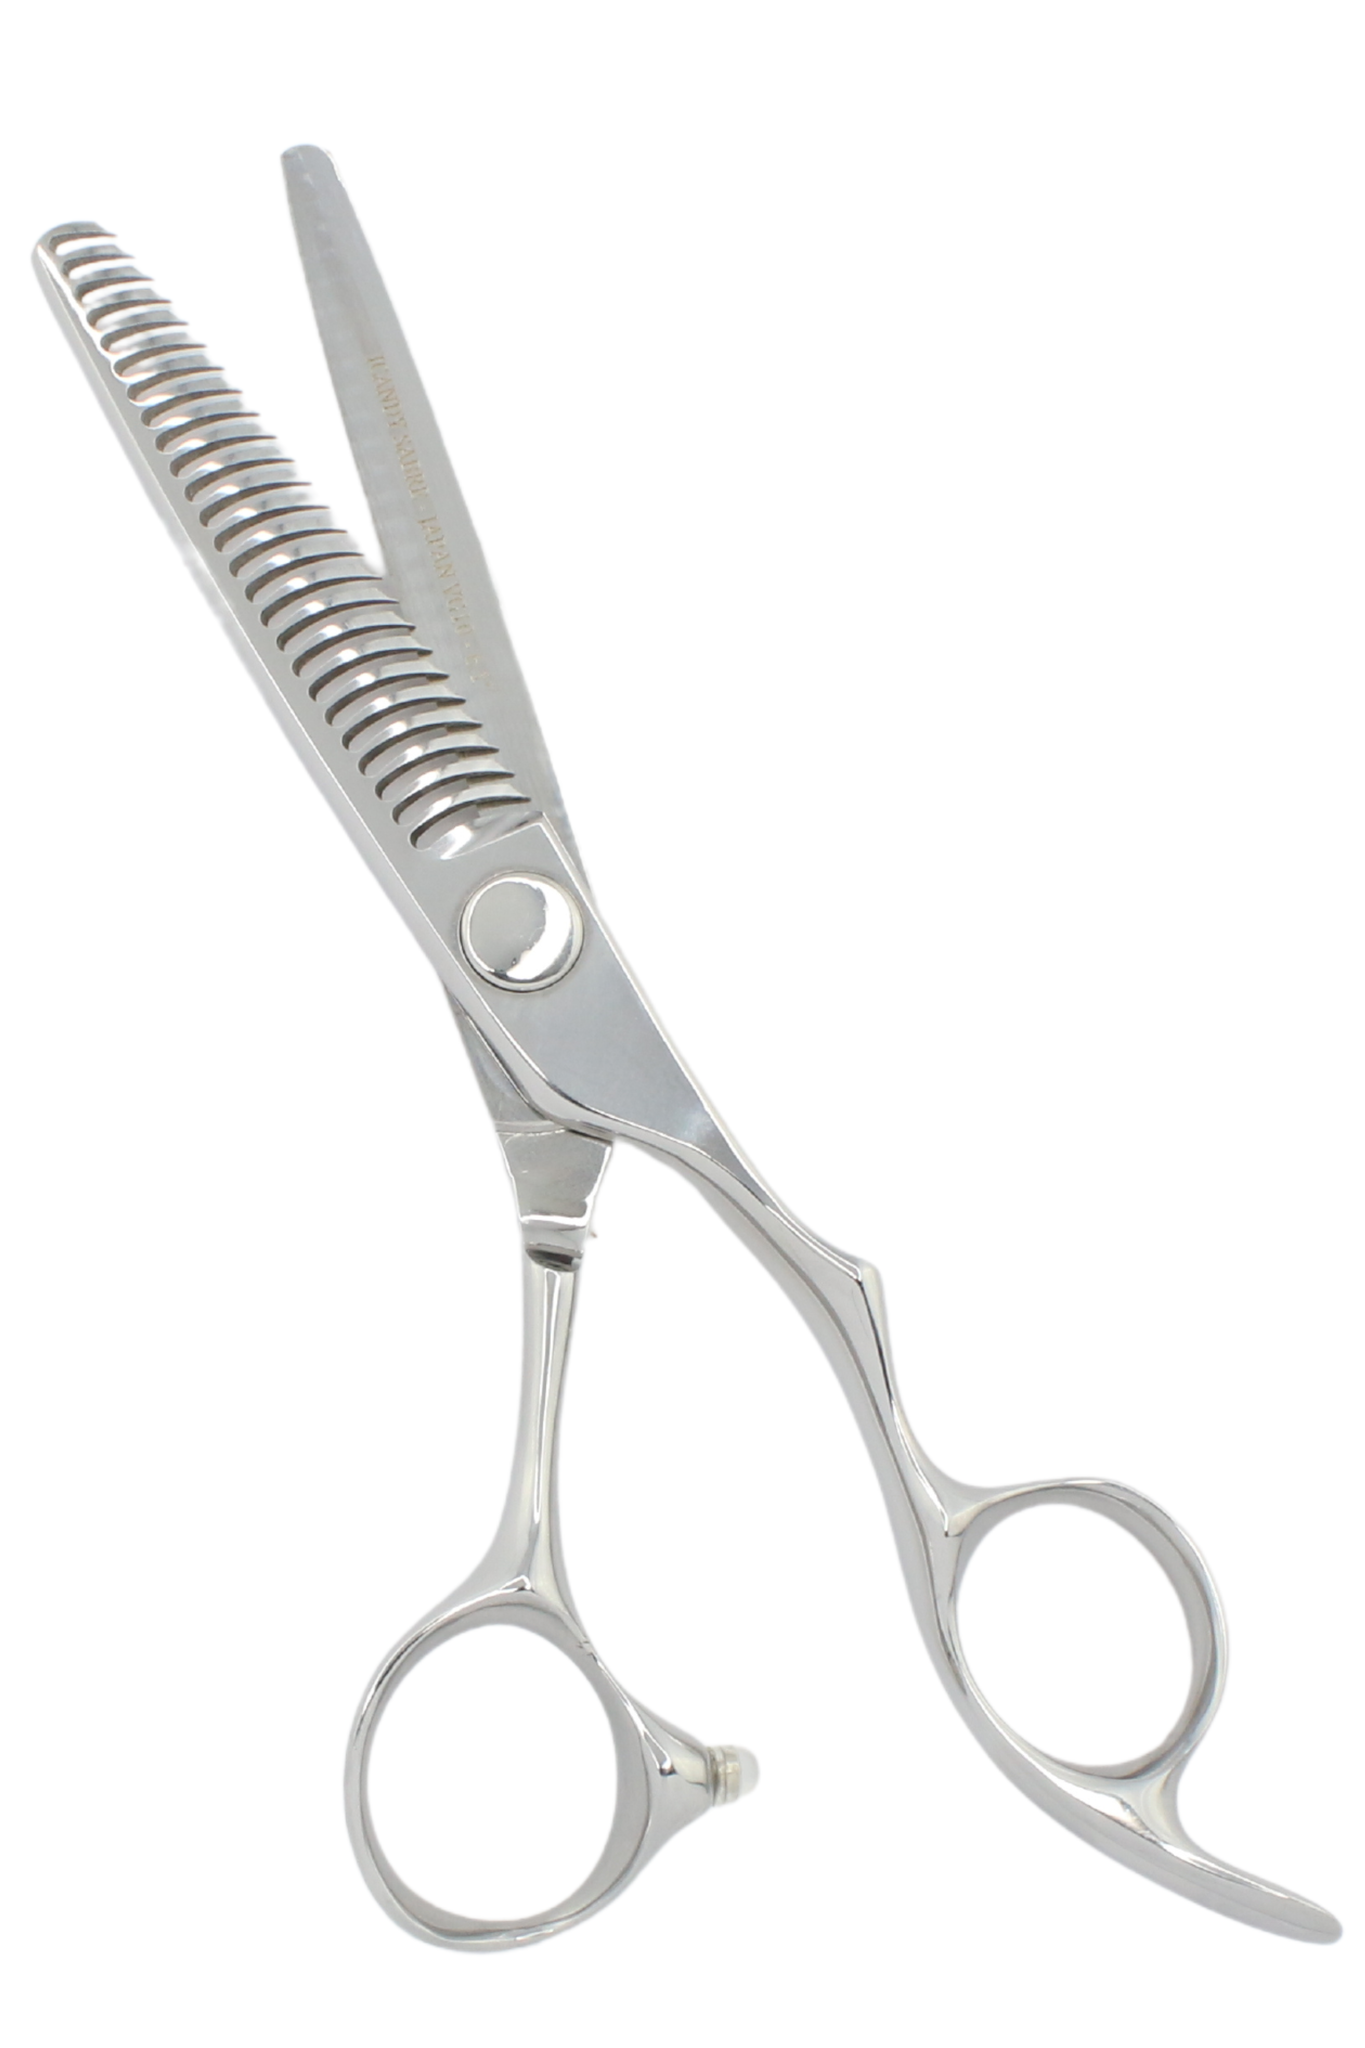 iCandy SABRE VG10 Thinning Scissors (6.1 inch) on White Background 1365x2048 Pic3